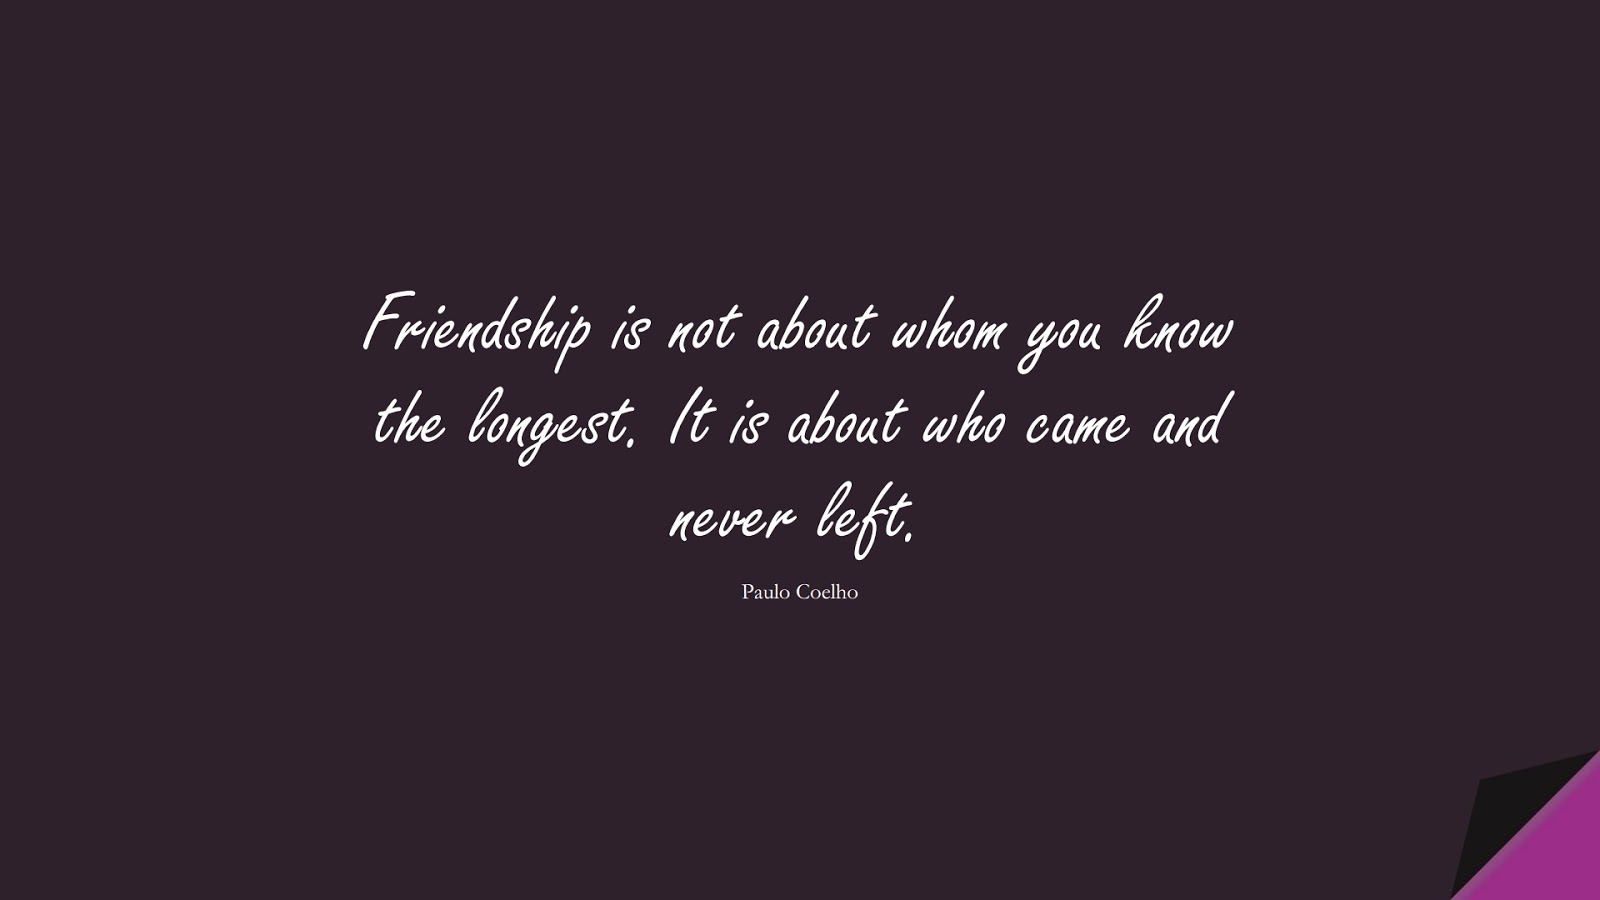 Friendship is not about whom you know the longest. It is about who came and never left. (Paulo Coelho);  #FriendshipQuotes